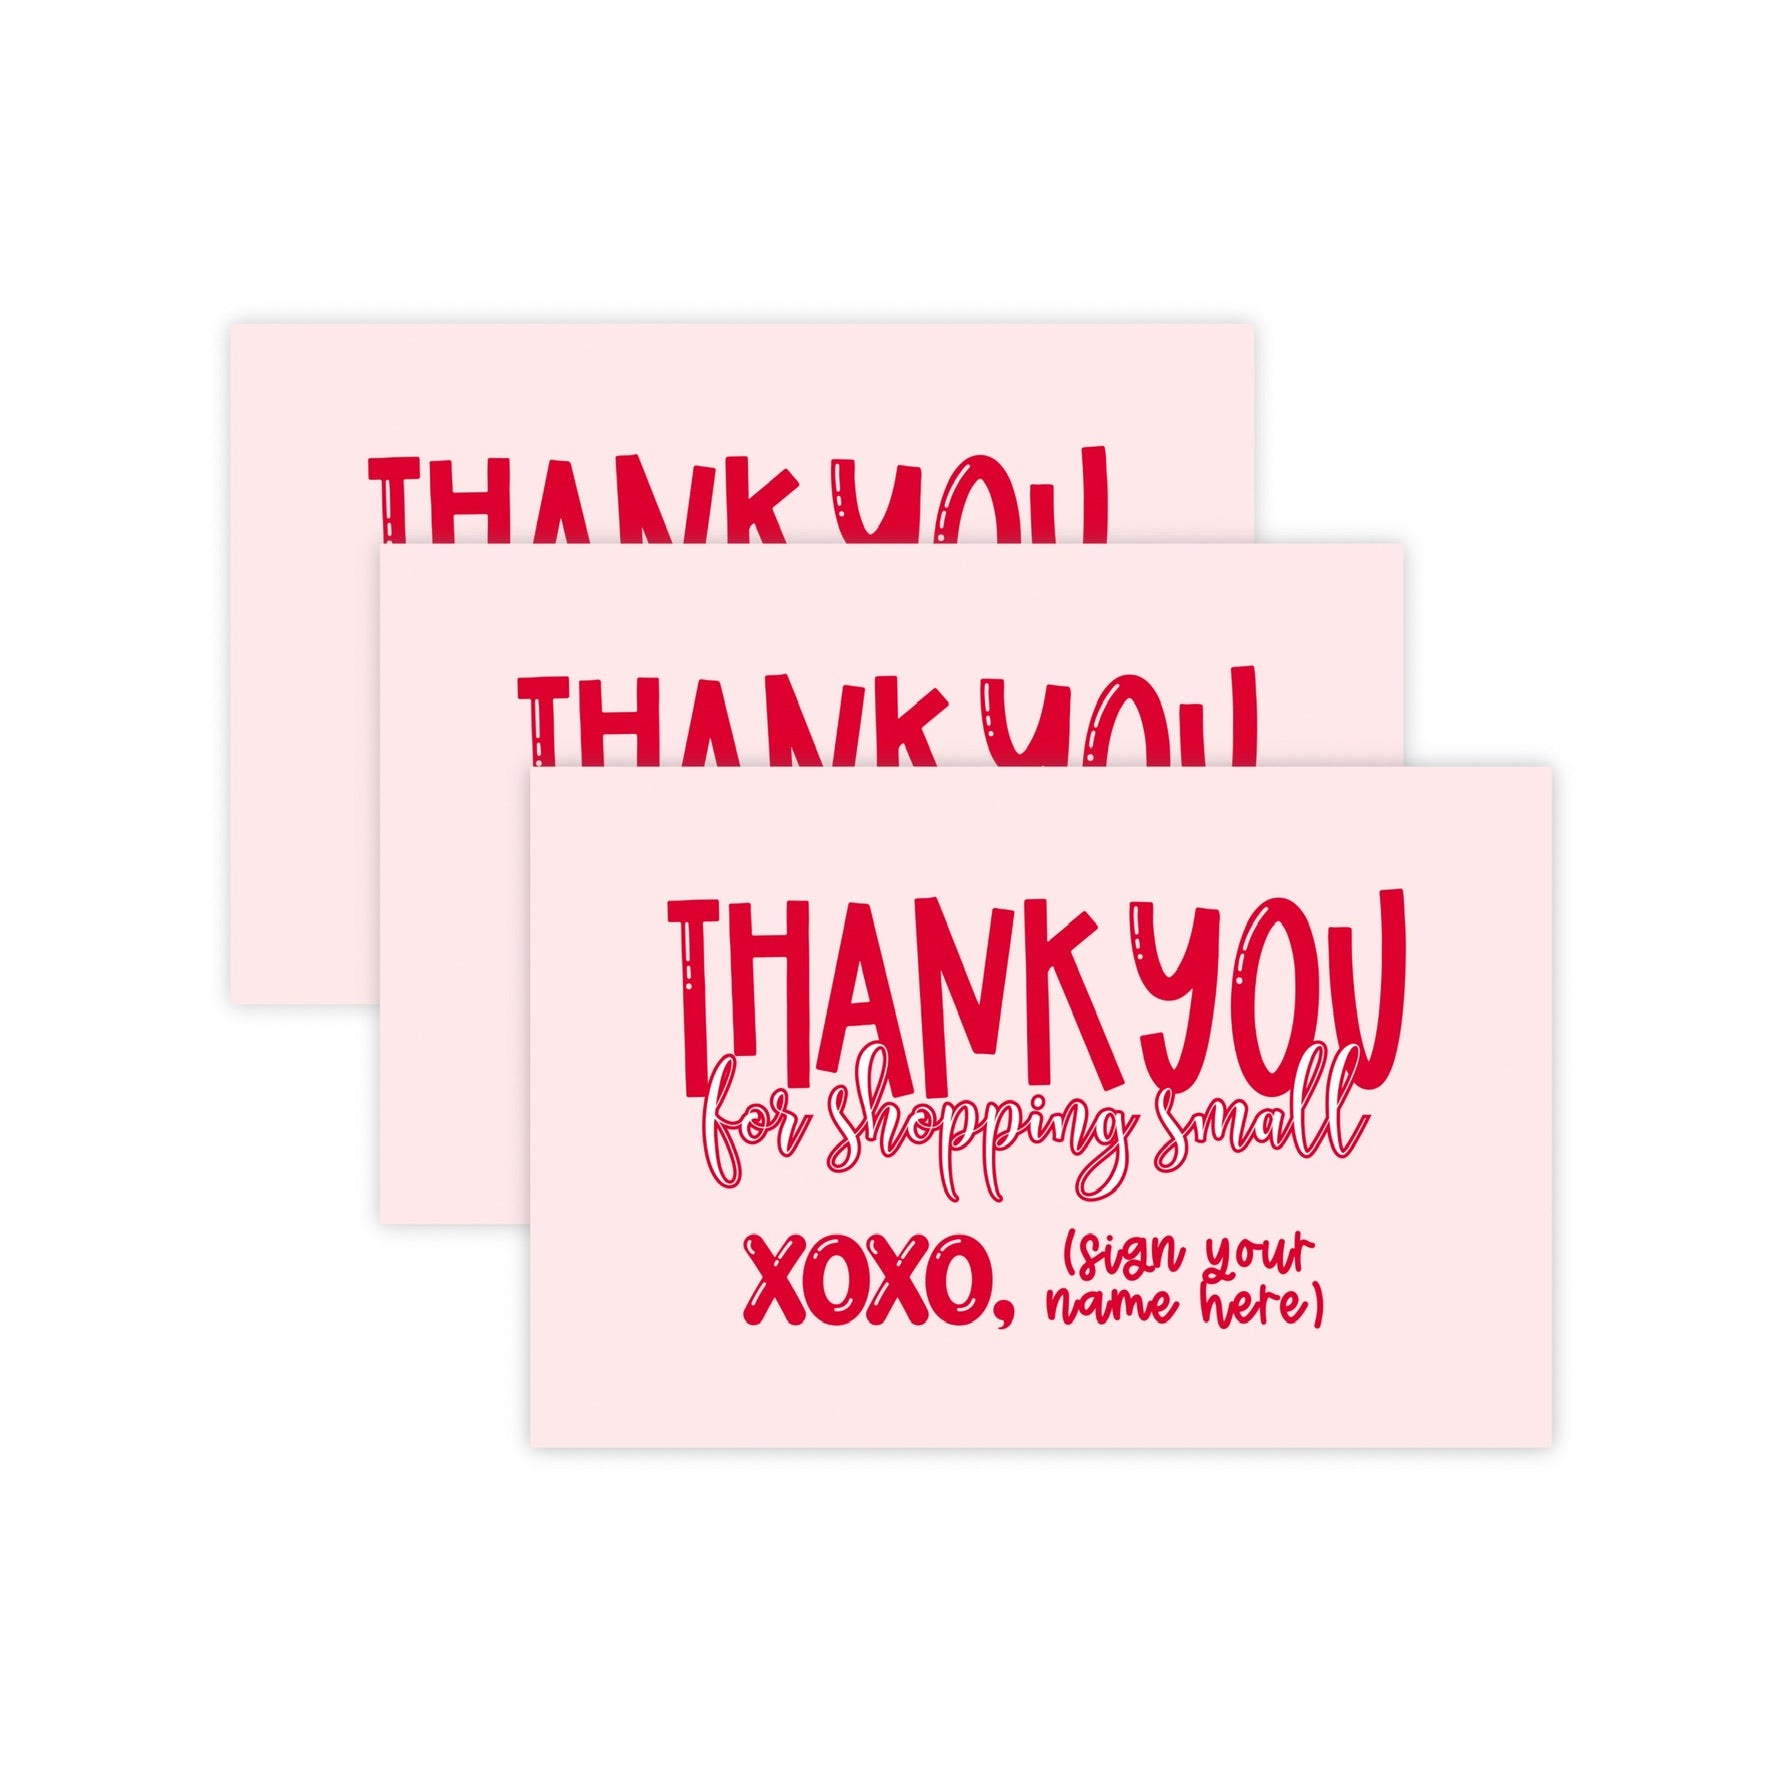 4x6" Package Insert Cards- XOXO